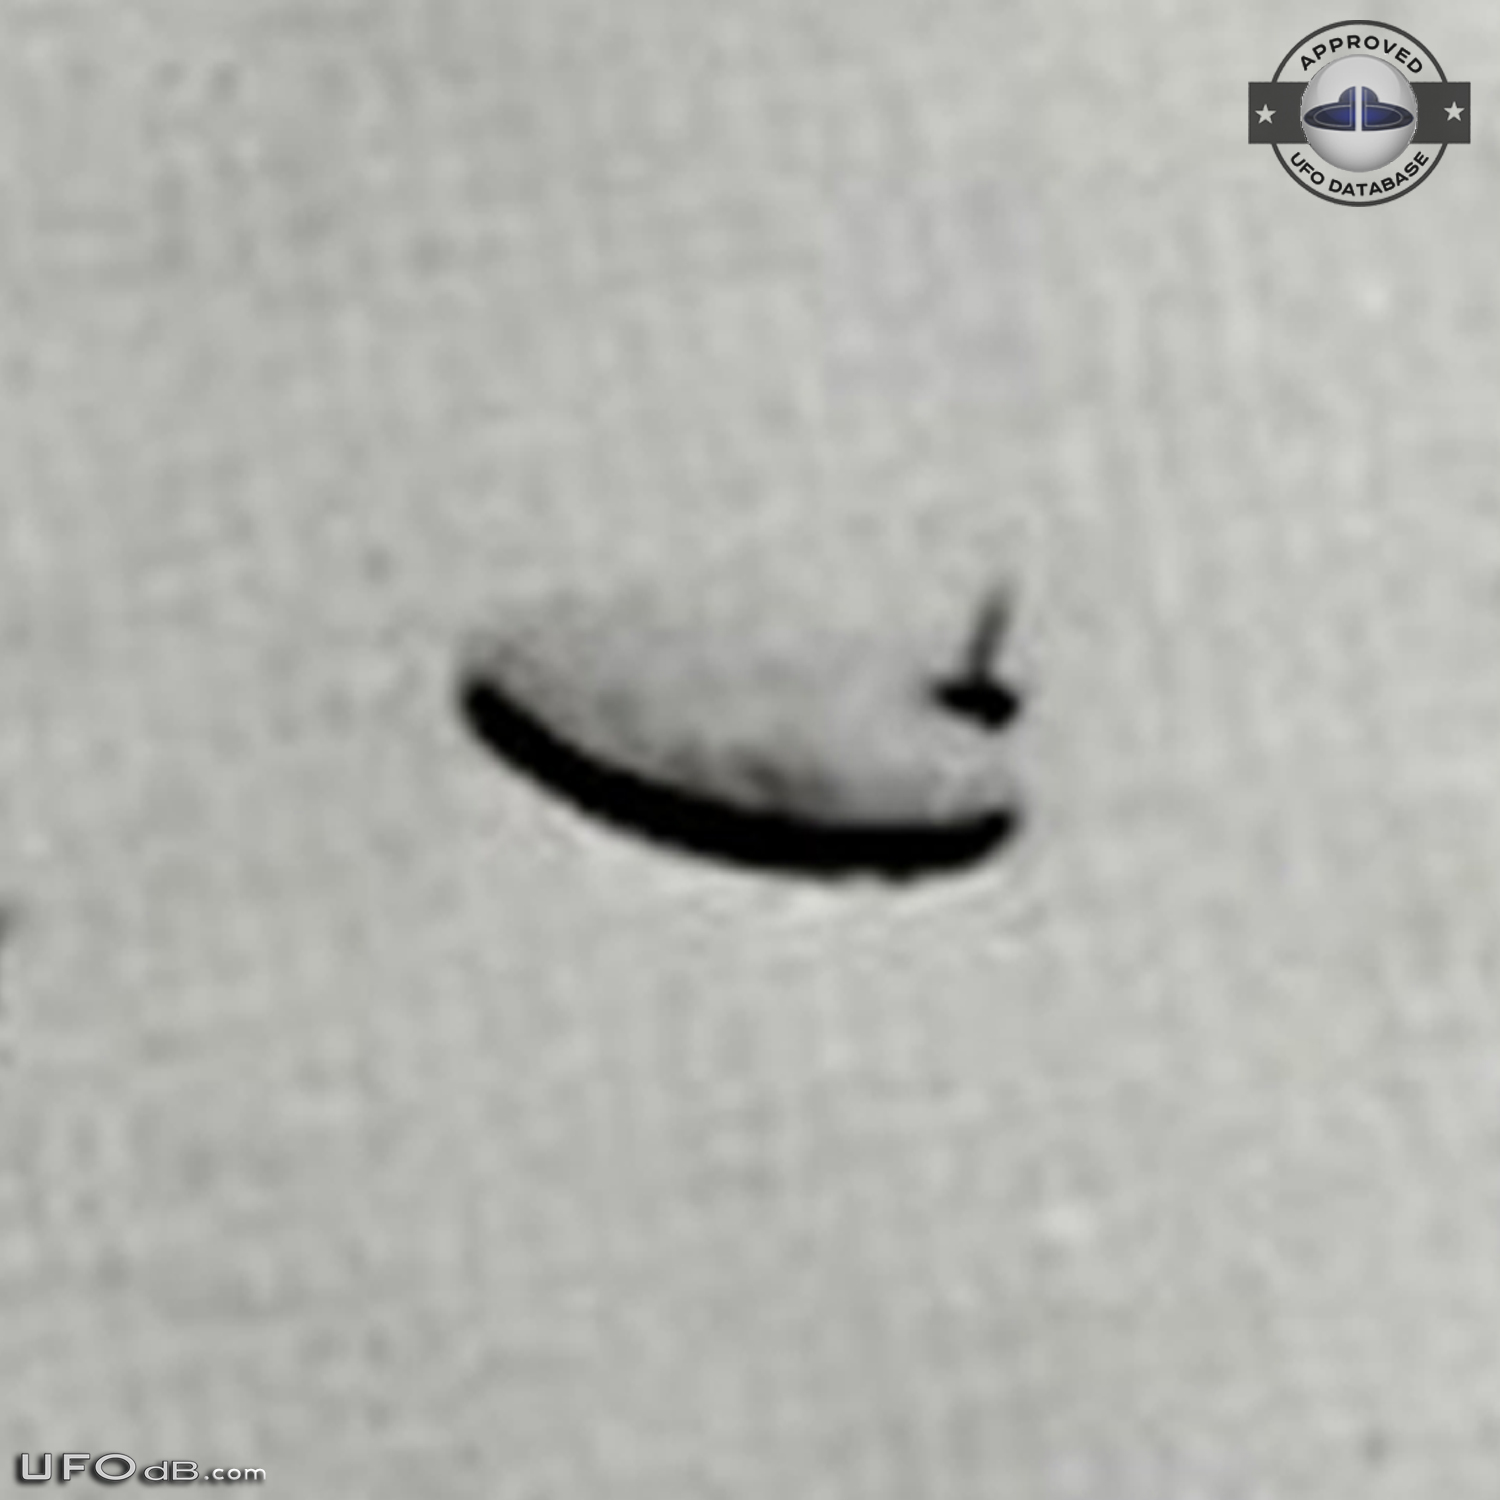 Teenages Boys see Saucer UFO in Lake St Clair Michigan USA 1967 UFO Picture #584-4